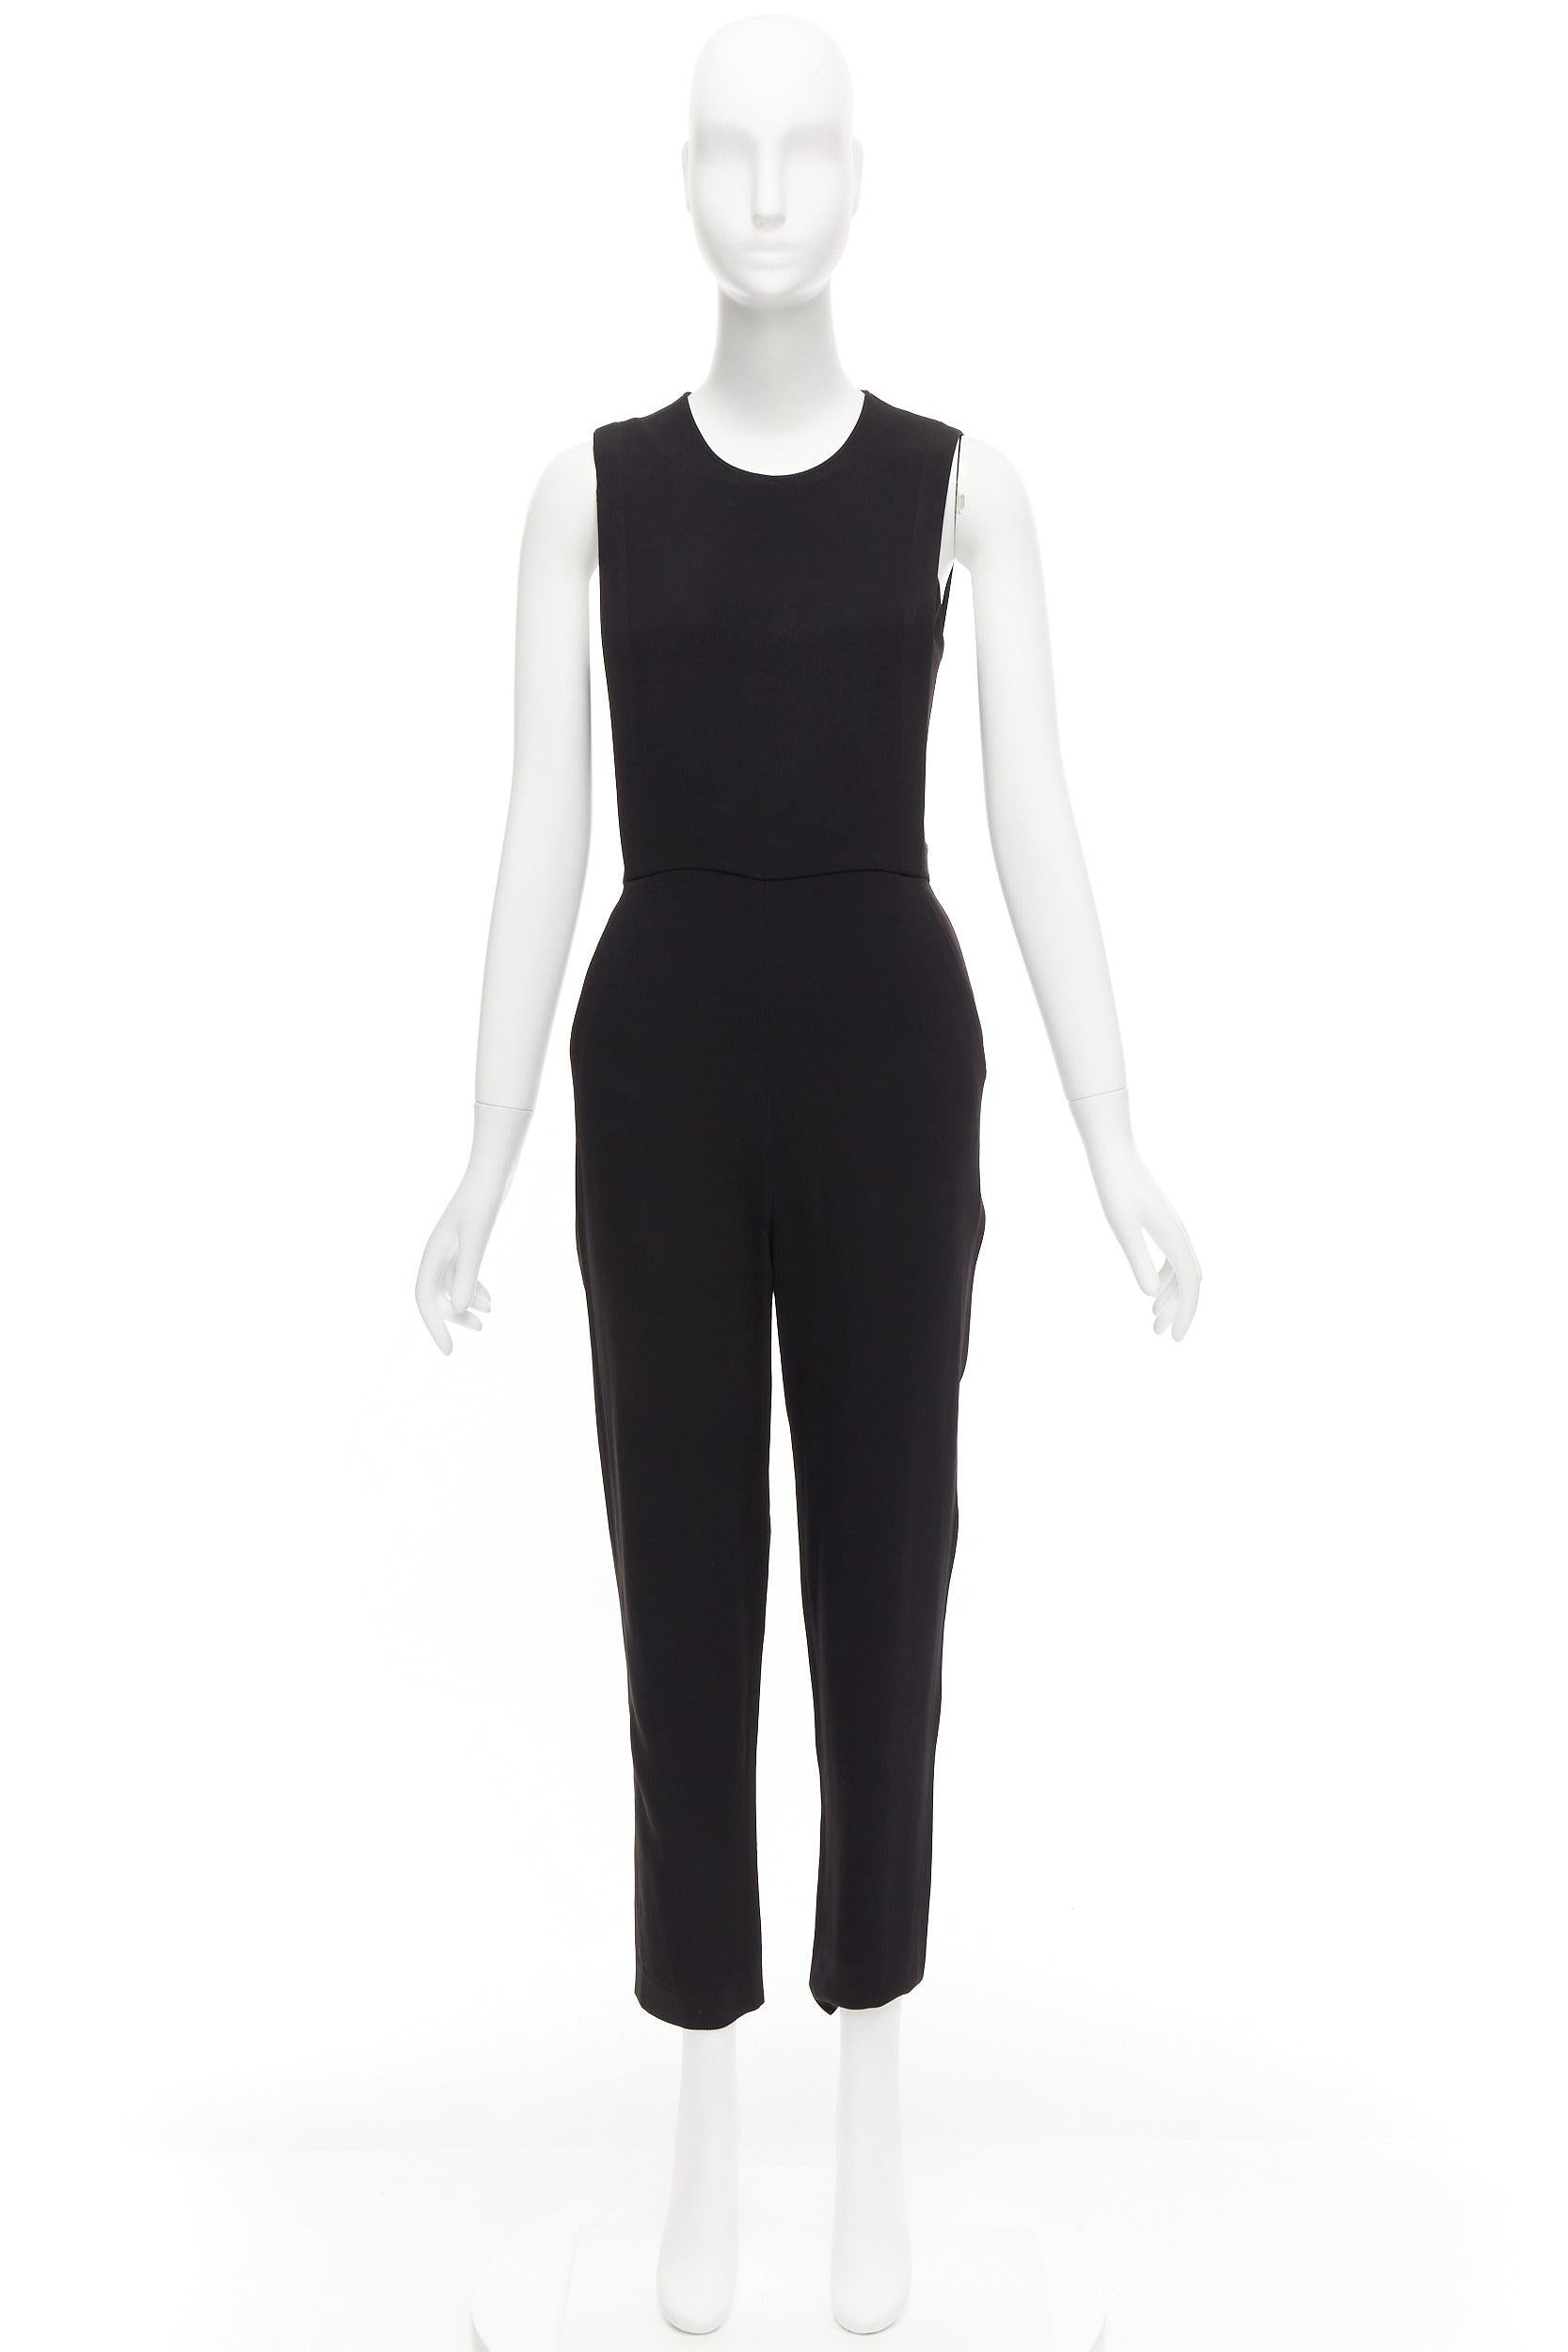 THEORY black layered top back zip cropped sleeveless jumpsuit US0 XS For Sale 5